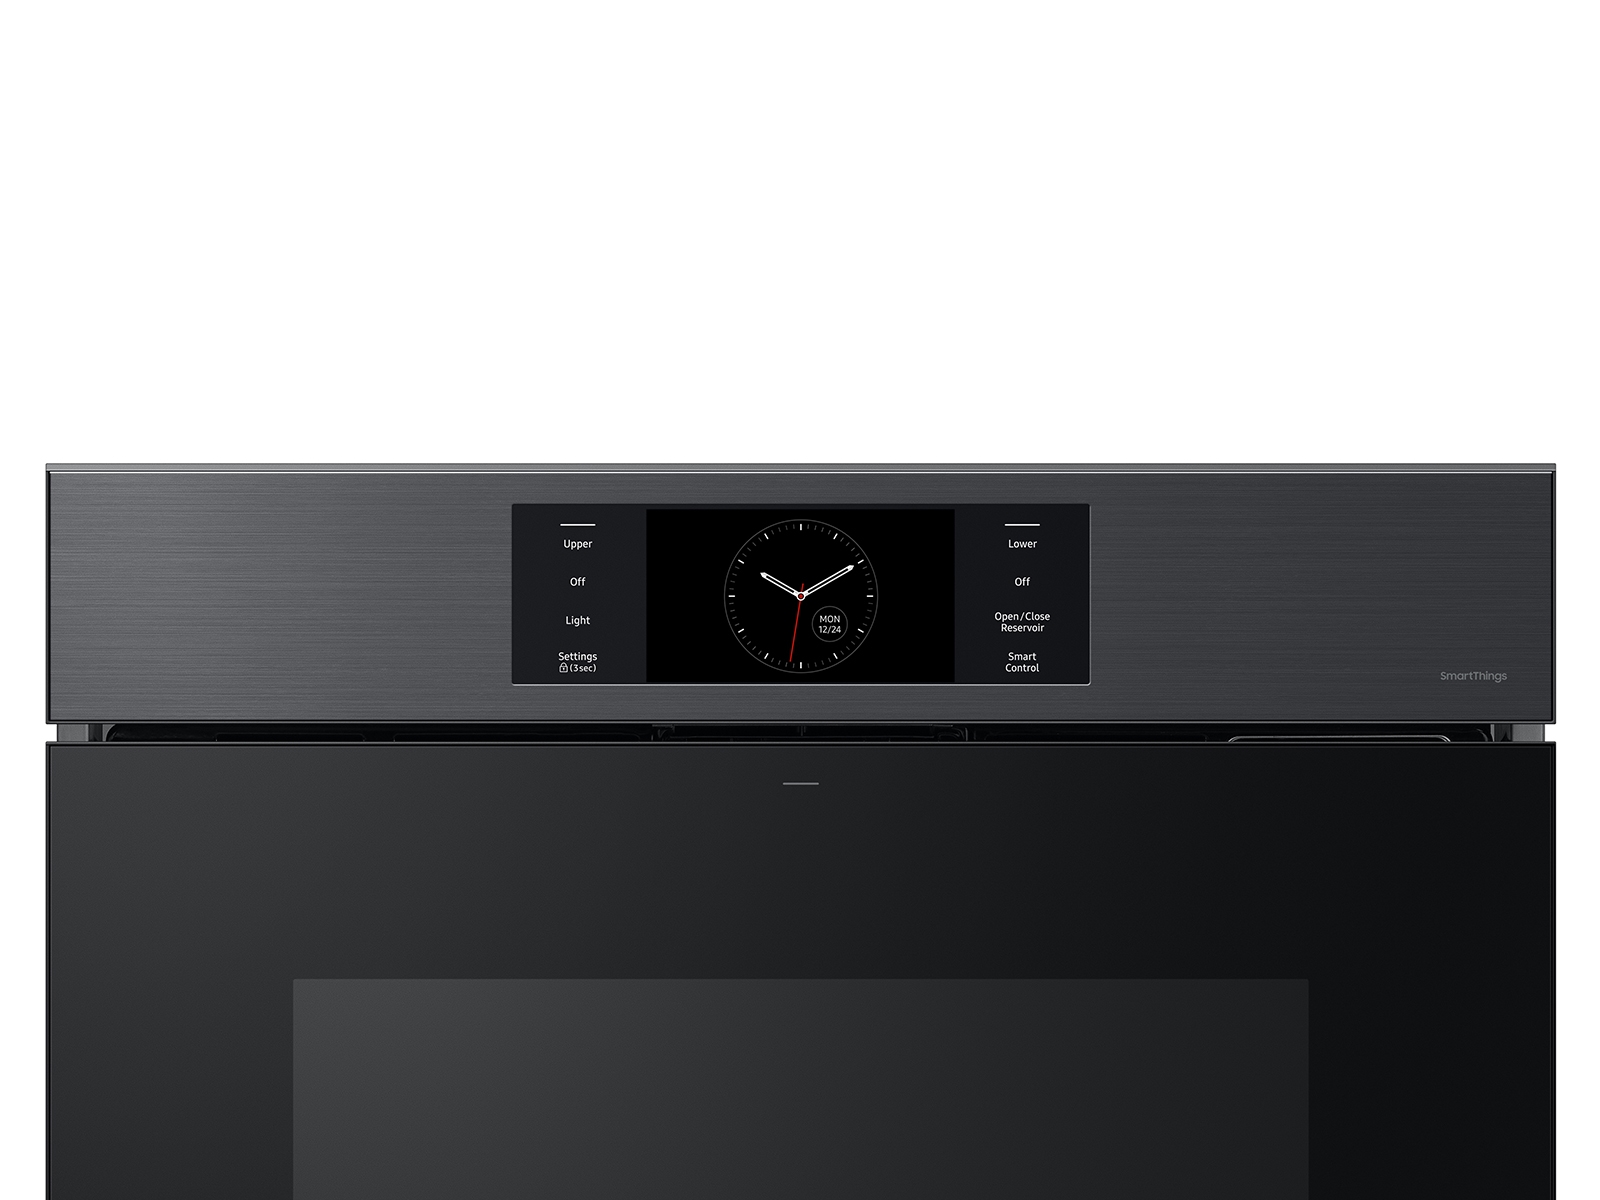 Common Miele Oven Faults & Solutions